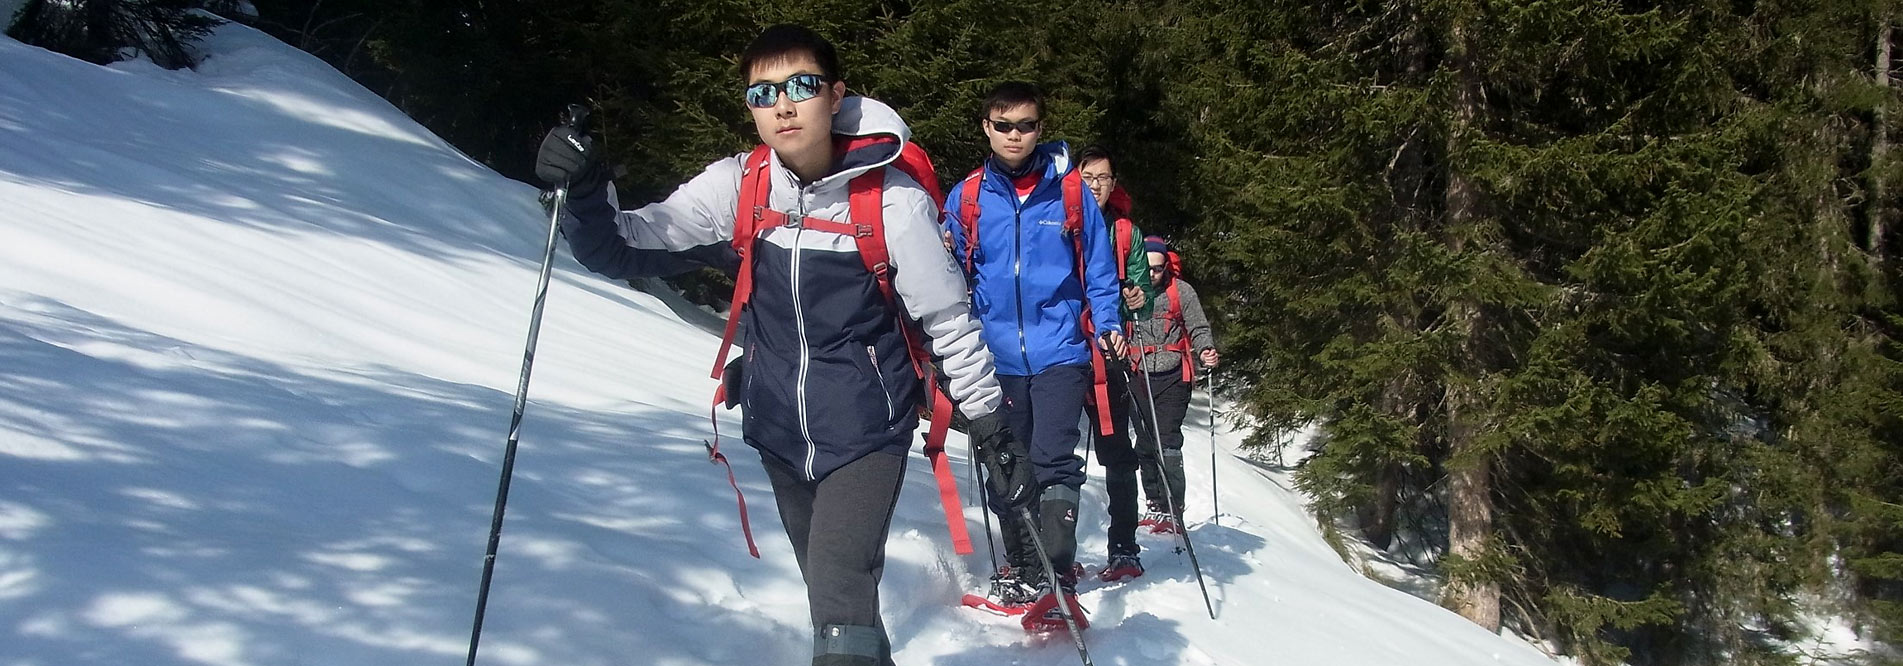 Snowshoeing: The schedule also contains outdoor education in winter, like here on a snowshoe tour in the Allgäu.